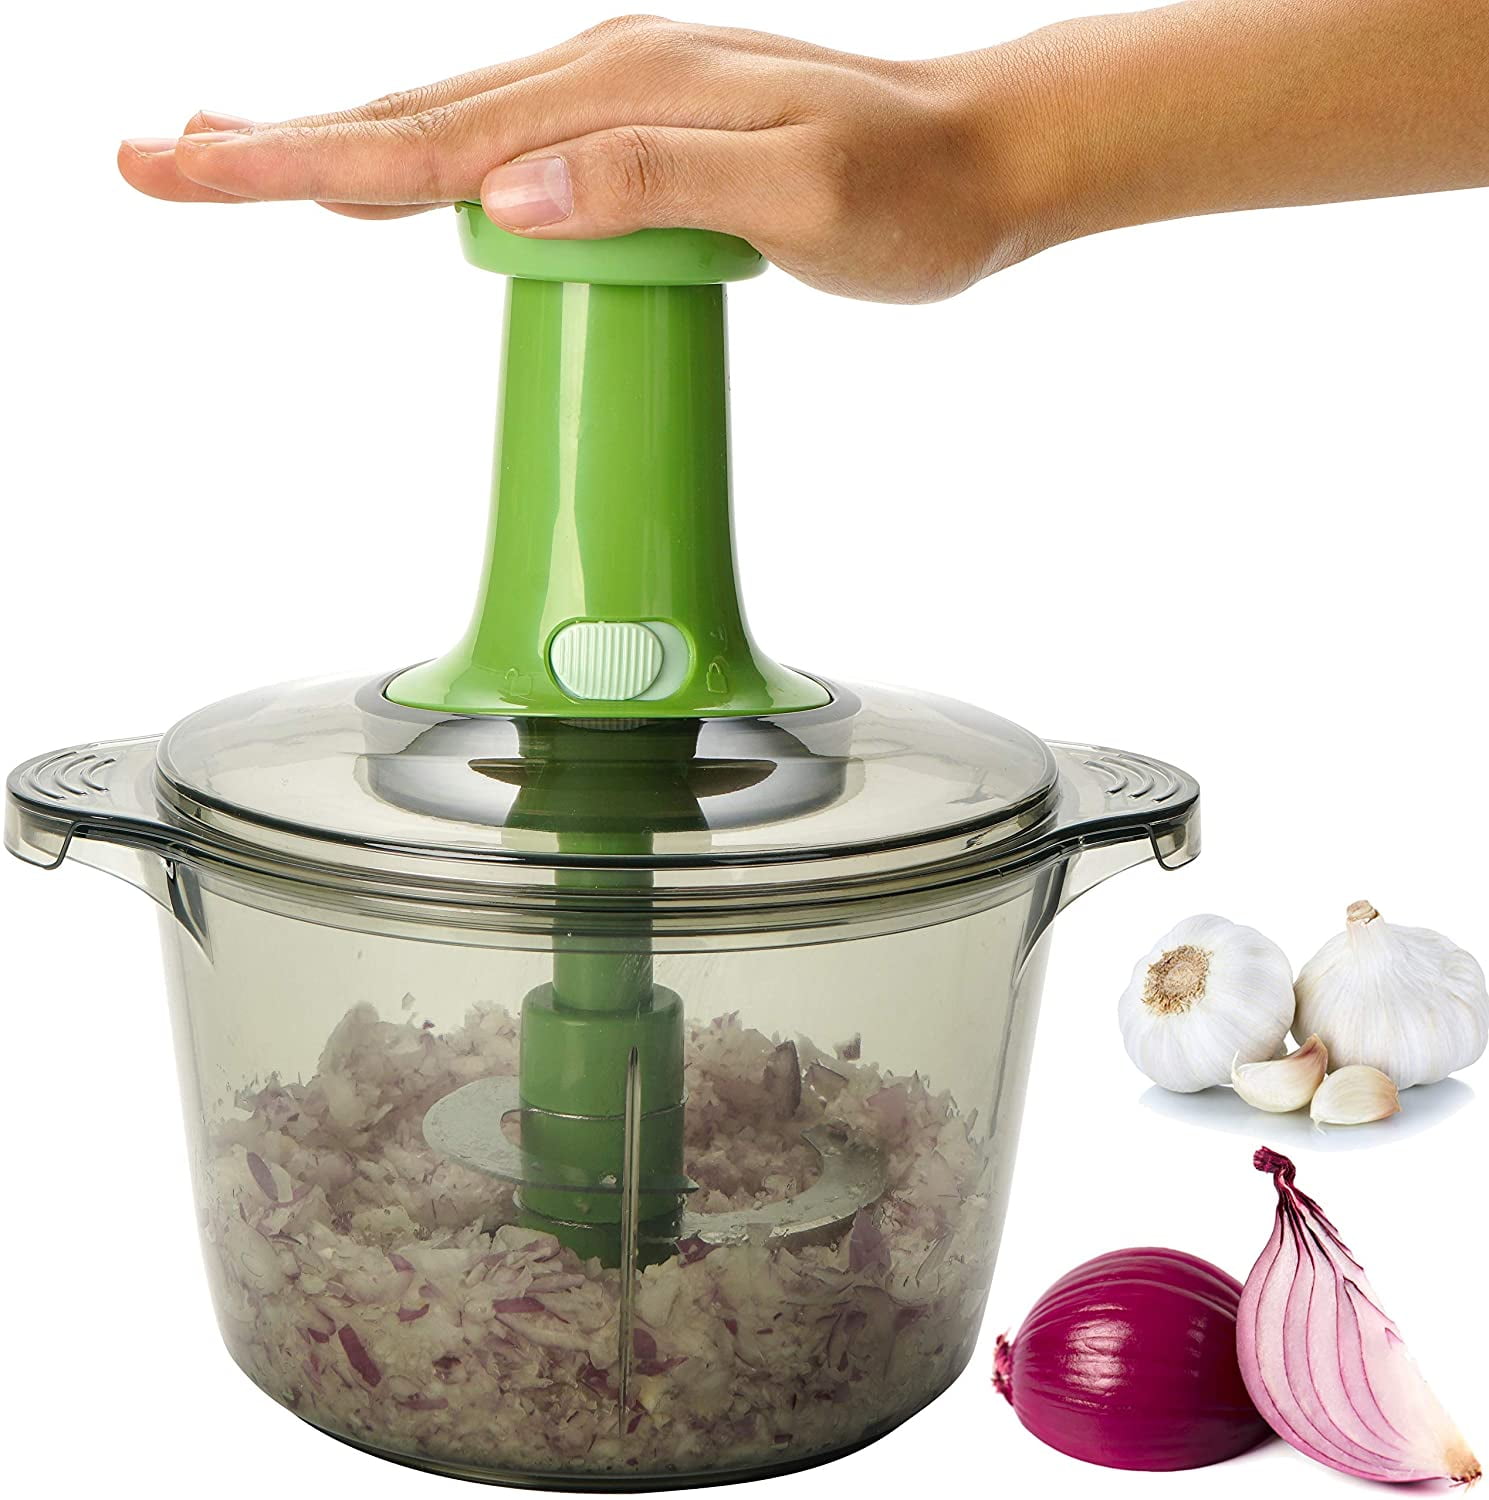 Nuts Vegetables Onions,Salad Manual Food Chopper Processor for Fruits Herbs 